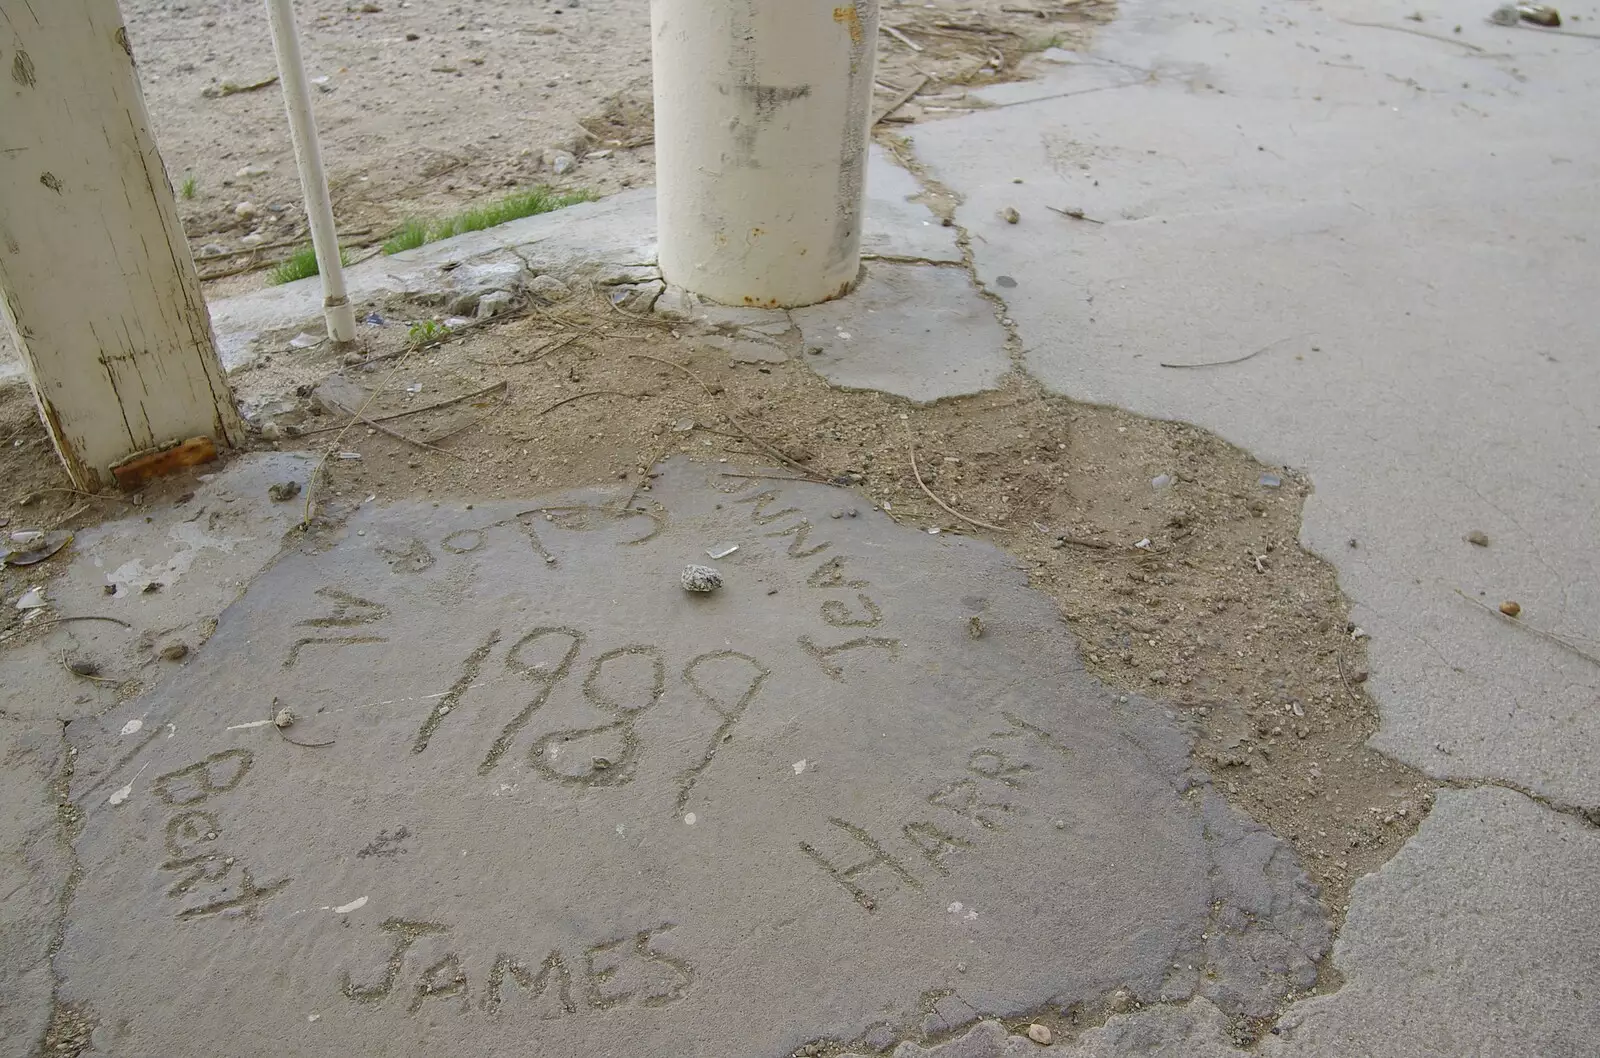 Concrete writing from 1989 shows a poignant hope, from The End of the World: Julian to the Salton Sea and Back, California, US - 1st March 2008